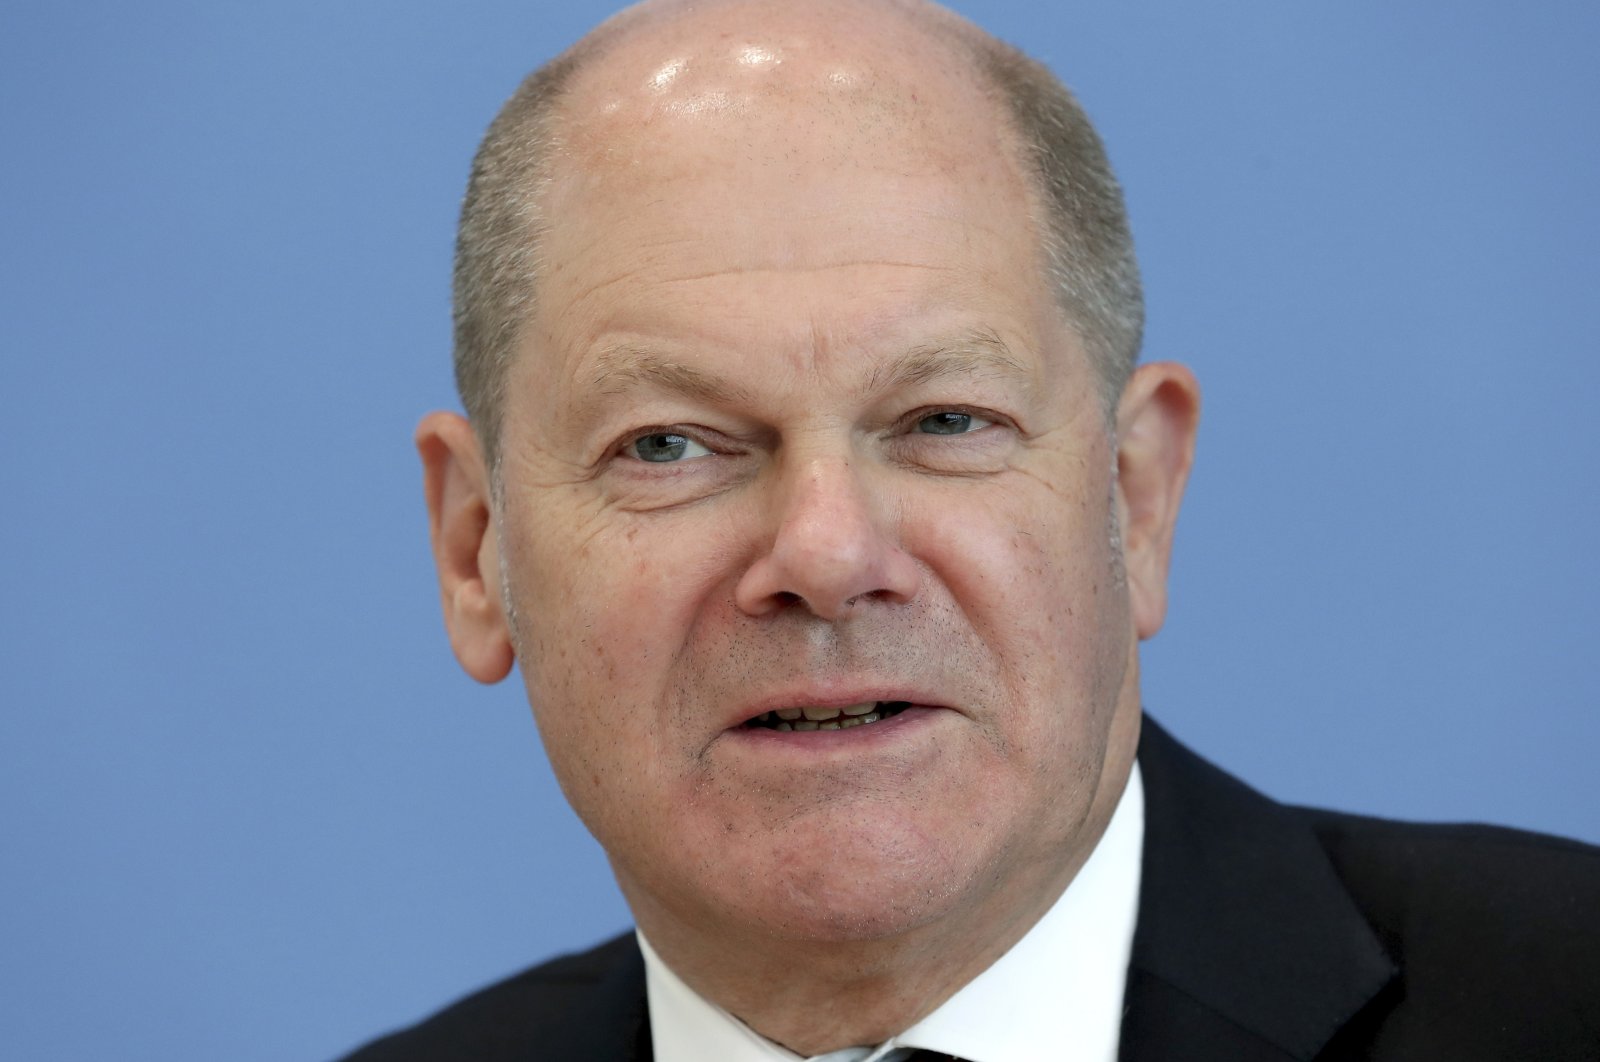 German Finance Minister Olaf Scholz addresses the media during a news conference in Berlin, Germany, May 14, 2020. (AP Photo)